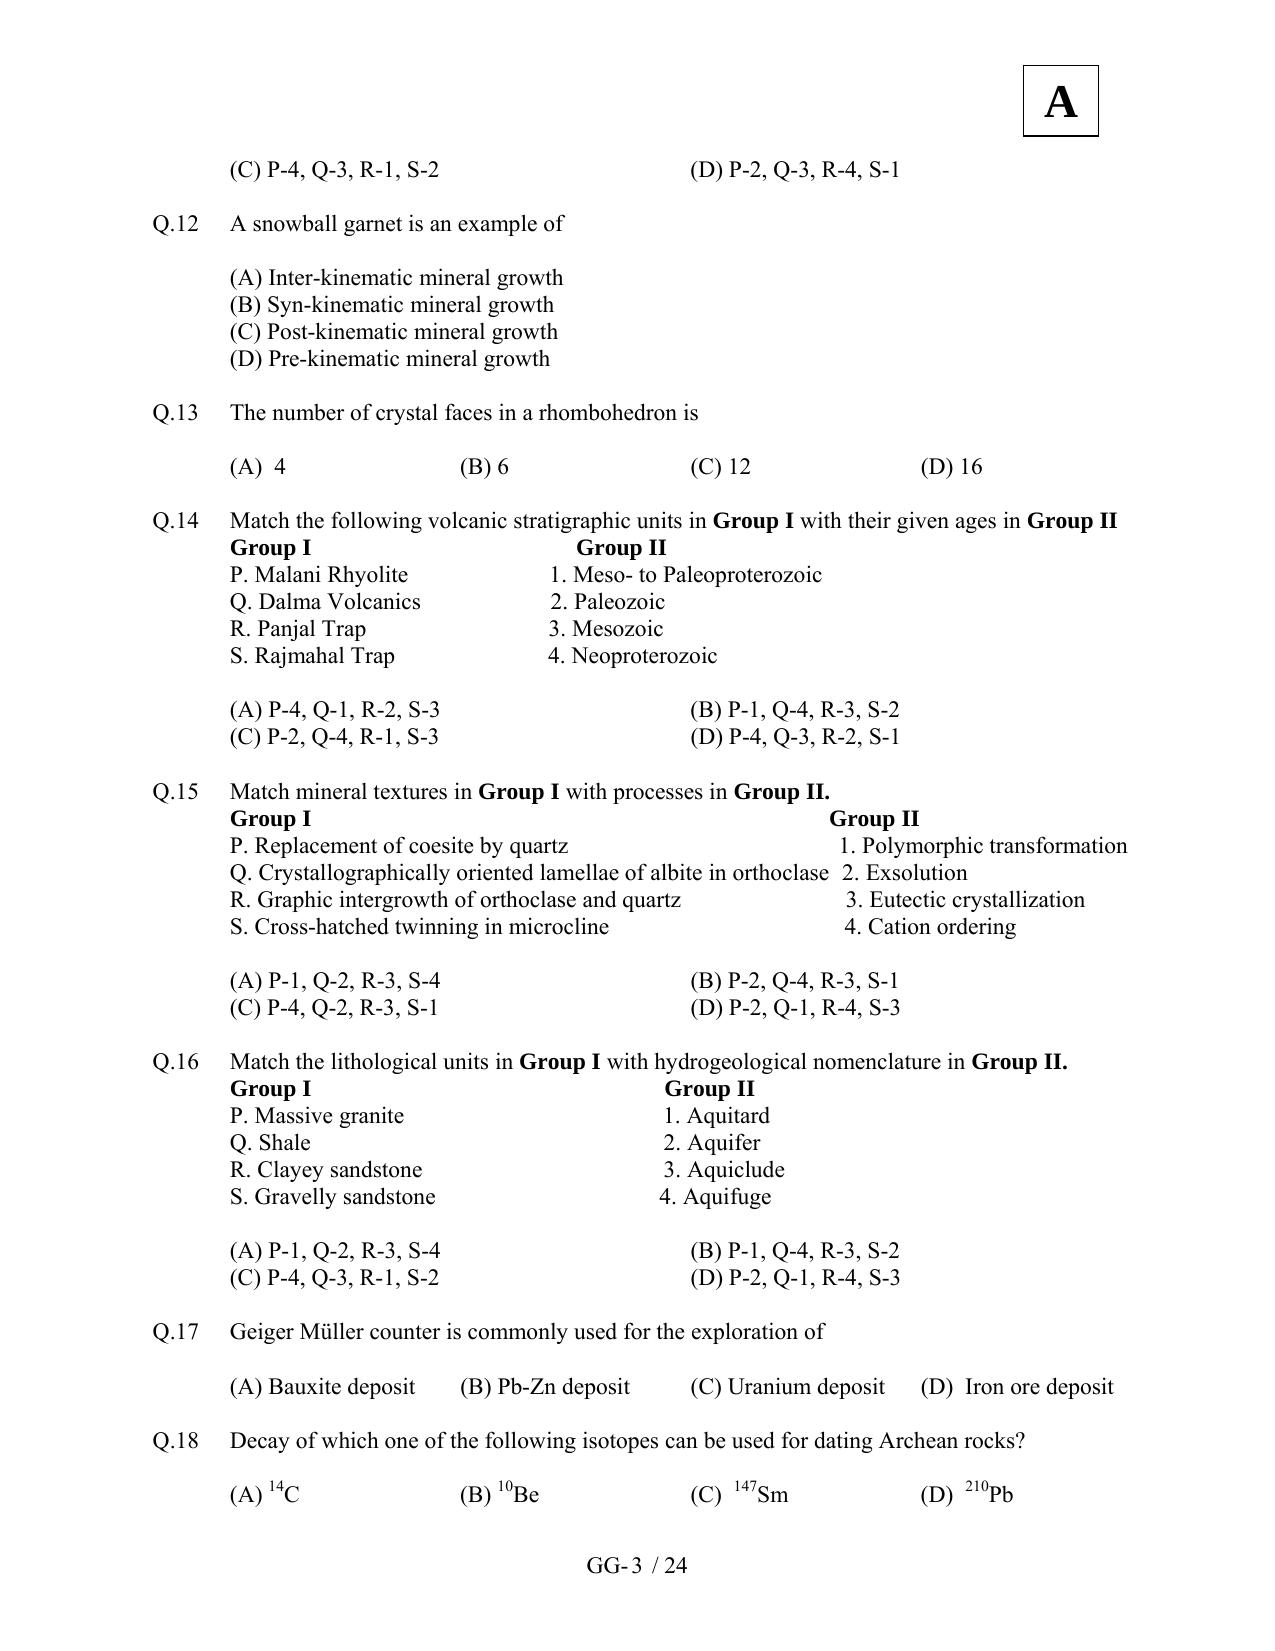 JAM 2012: GG Question Paper - Page 5